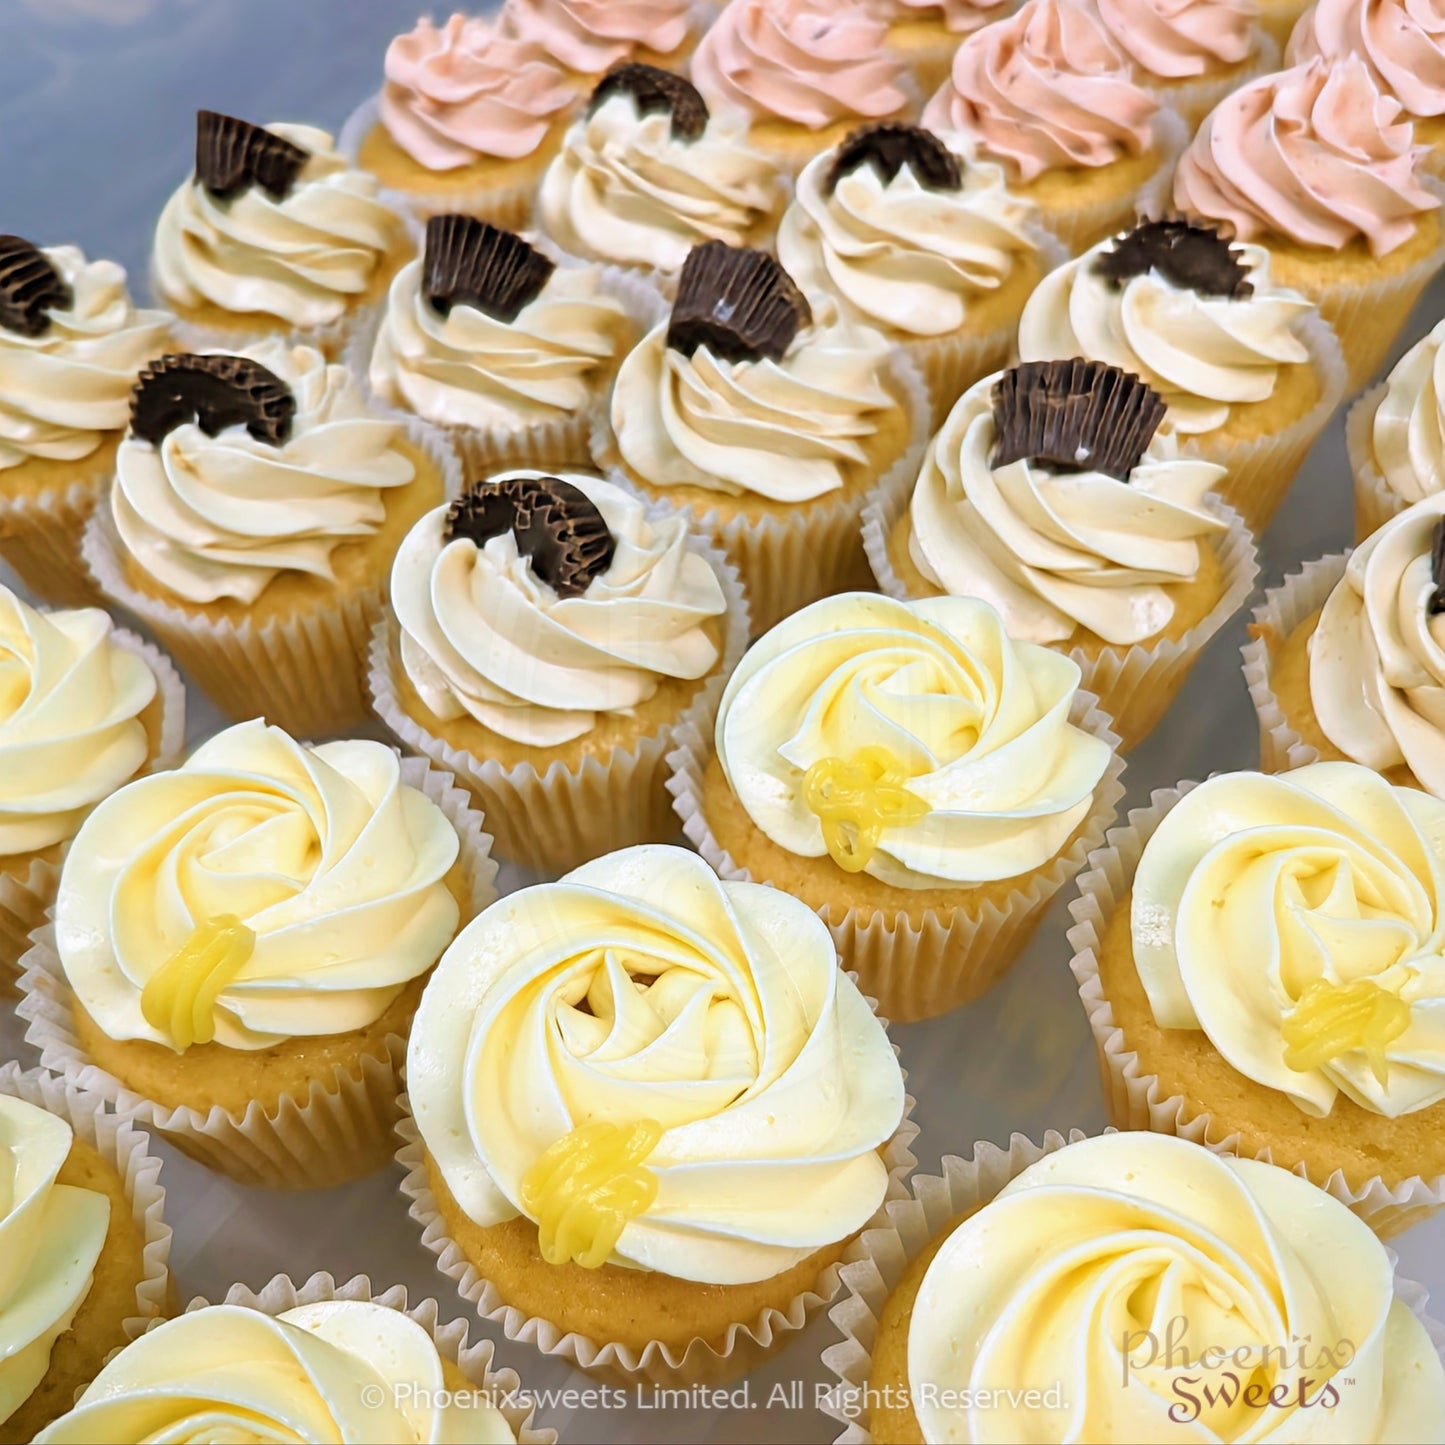 Gourmet Cupcake - Random Flavours (24pc Set) with Free Paper Cupcake Tower